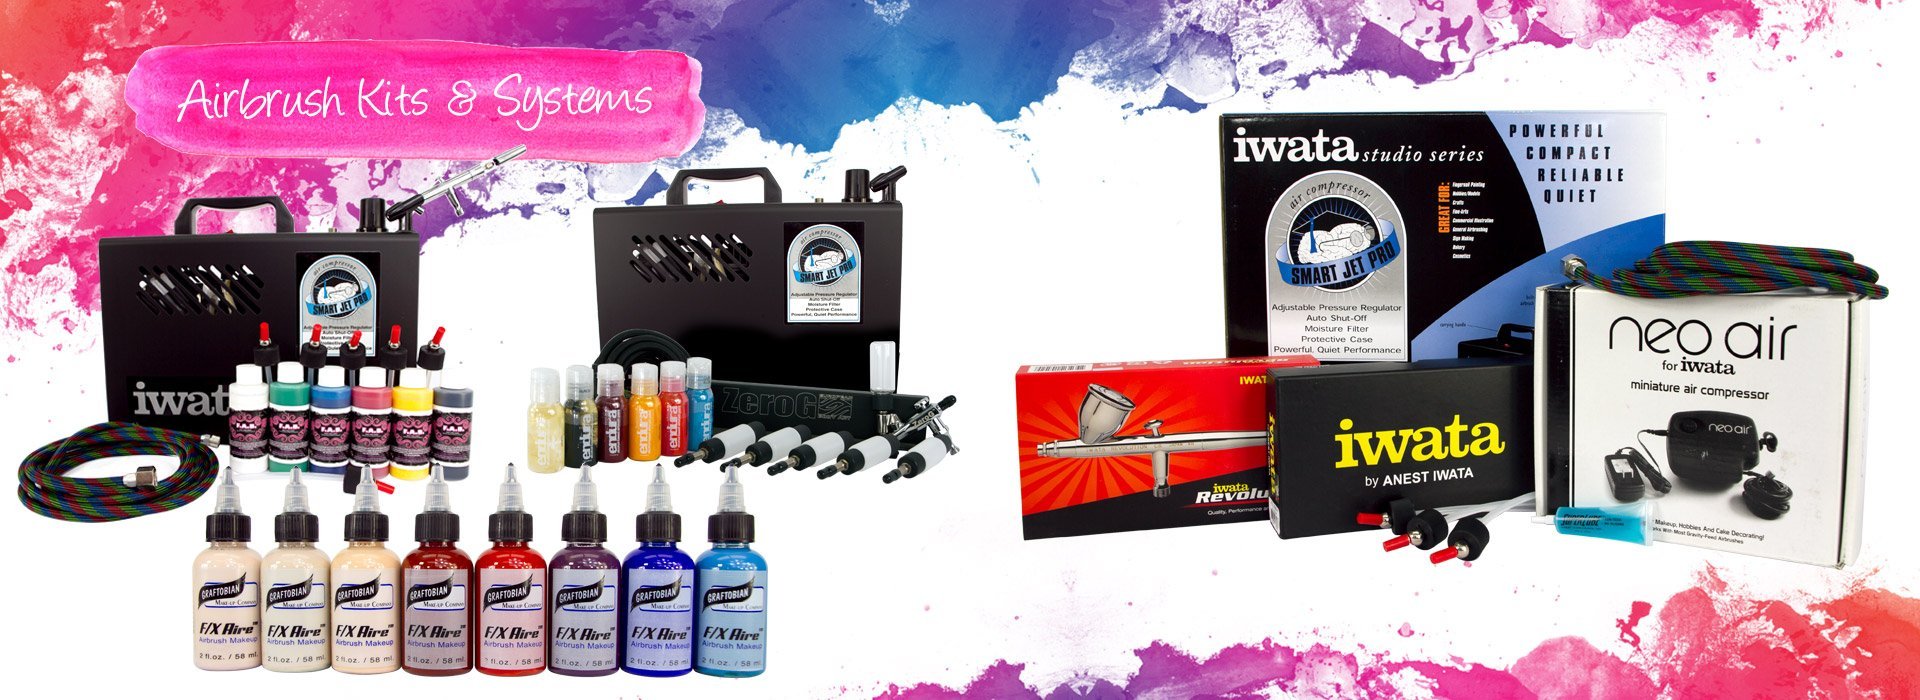 Airbrush Kits & Systems, Face Painting Supplies, Silly Farm